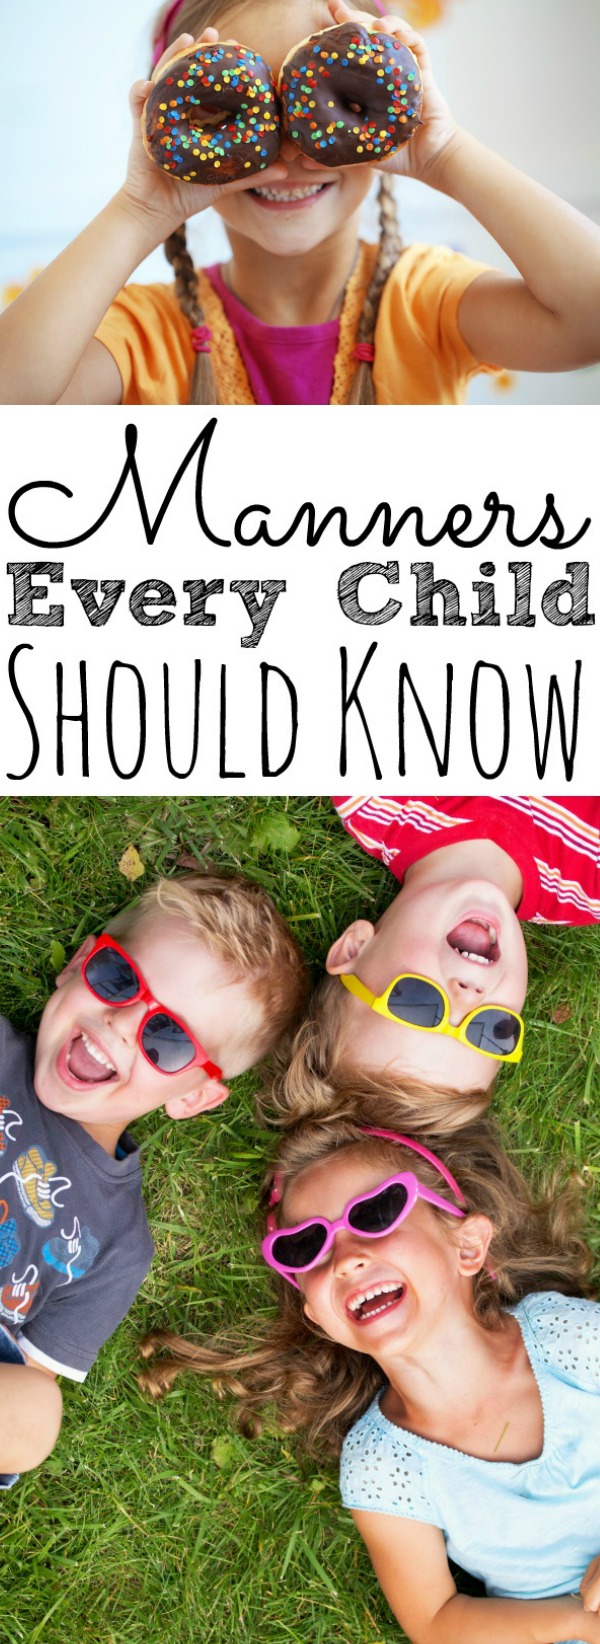 Manenrs Every Child Should Know